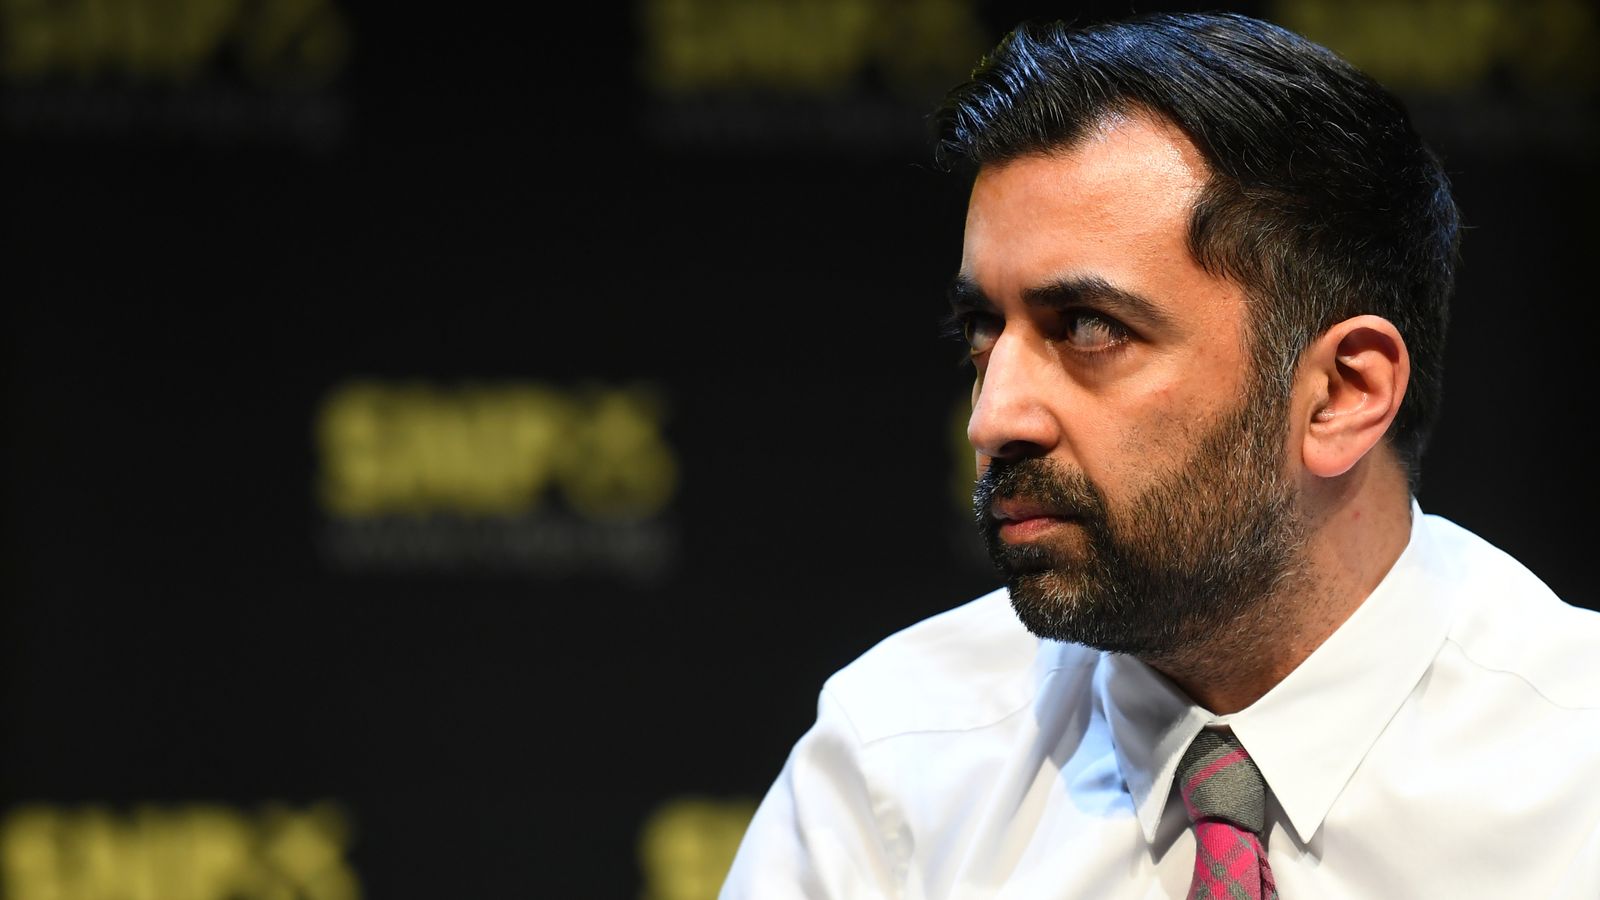 SNP leadership hopeful Humza Yousaf skipped key vote on gay marriage due to 'religious pressure', says Scotland's former first minister Alex Salmond